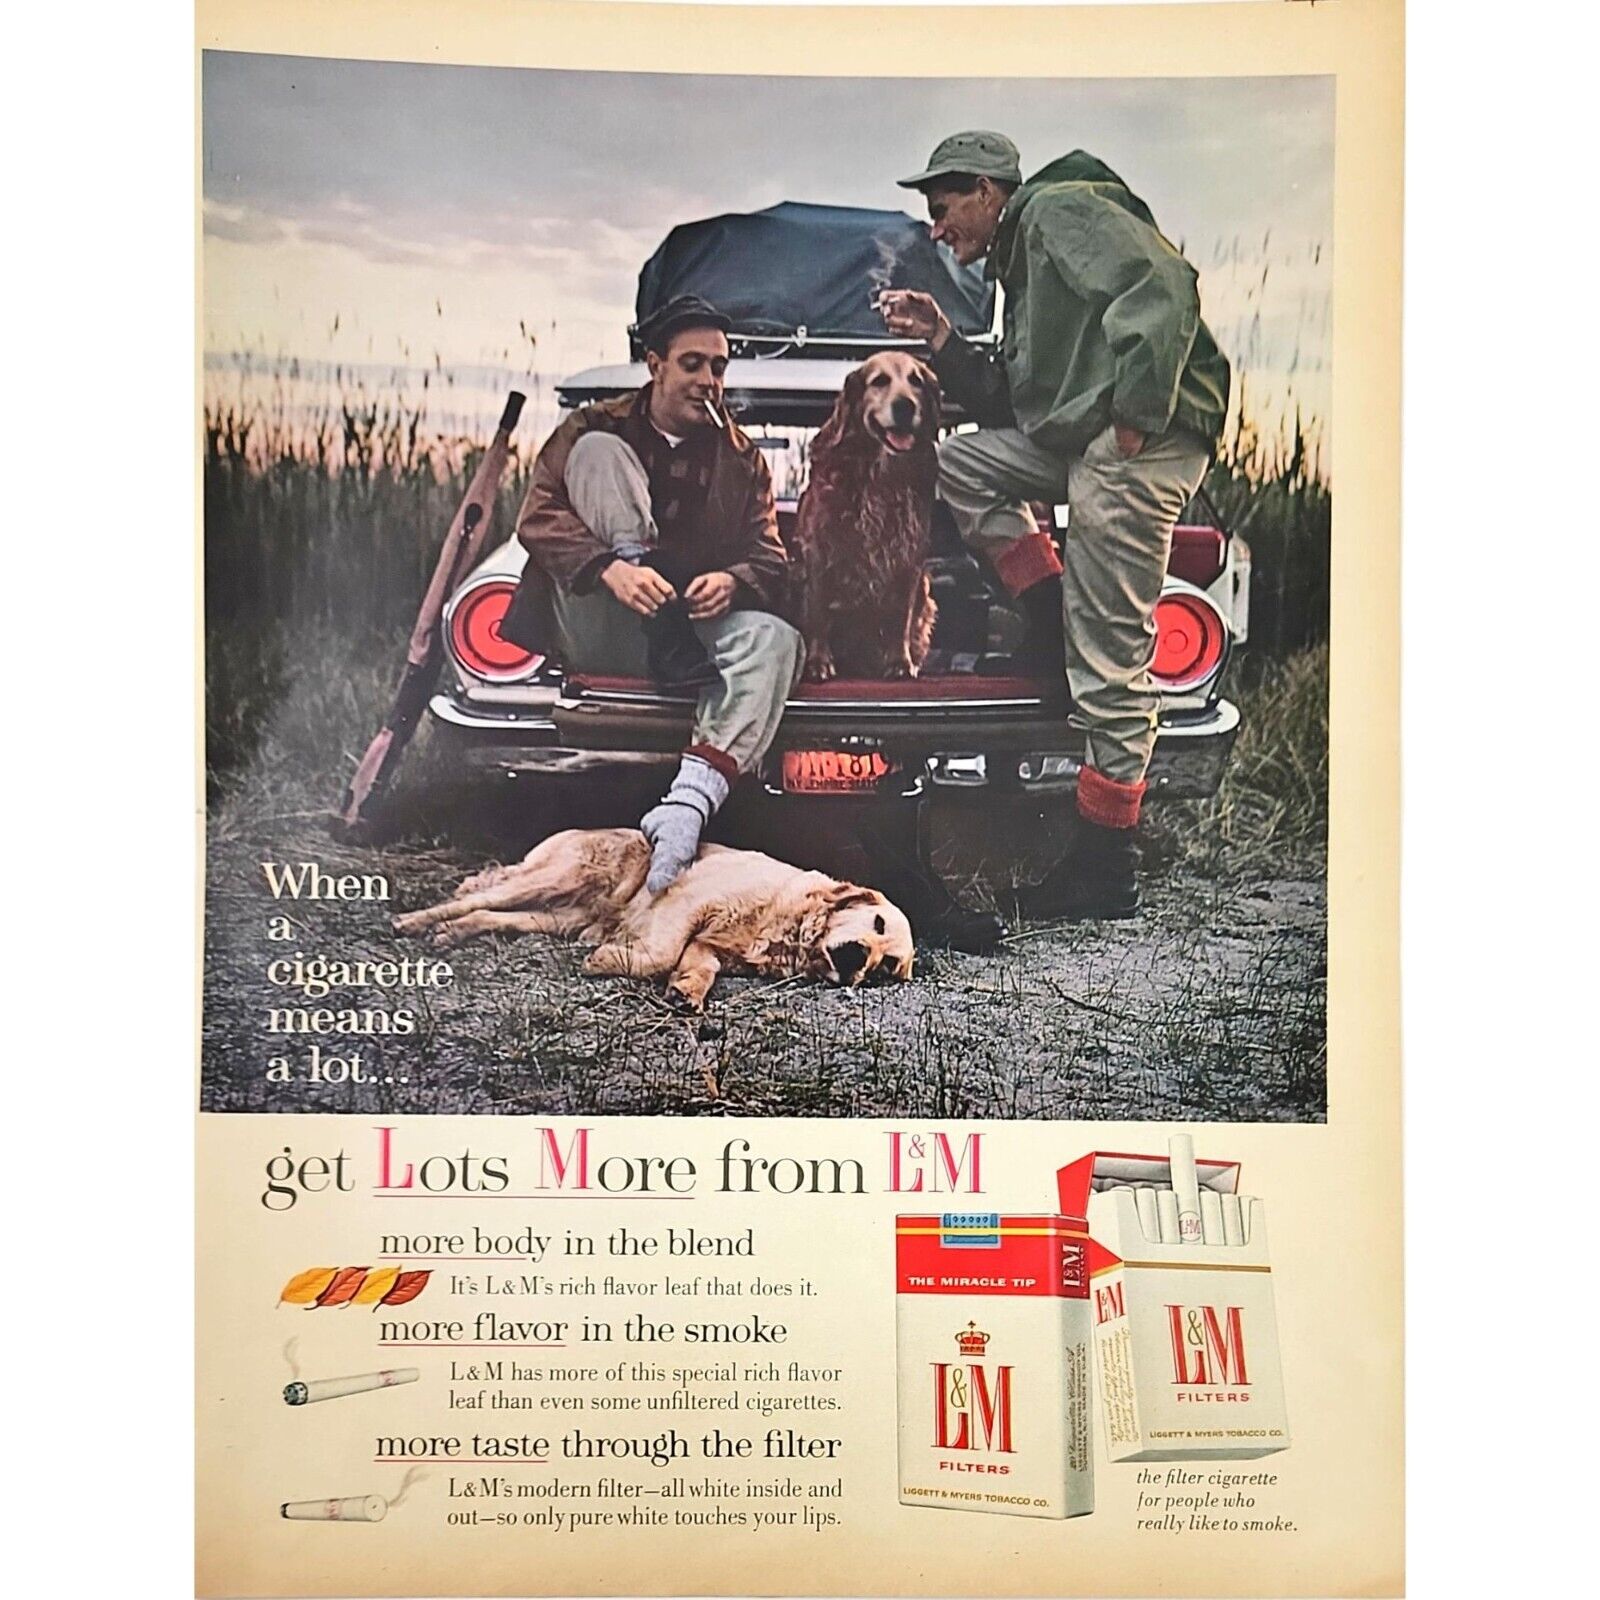 L&M Cigarettes 2 Guys Hunting With 2 Dogs Vintage Oct 1963 Print Ad 10x13